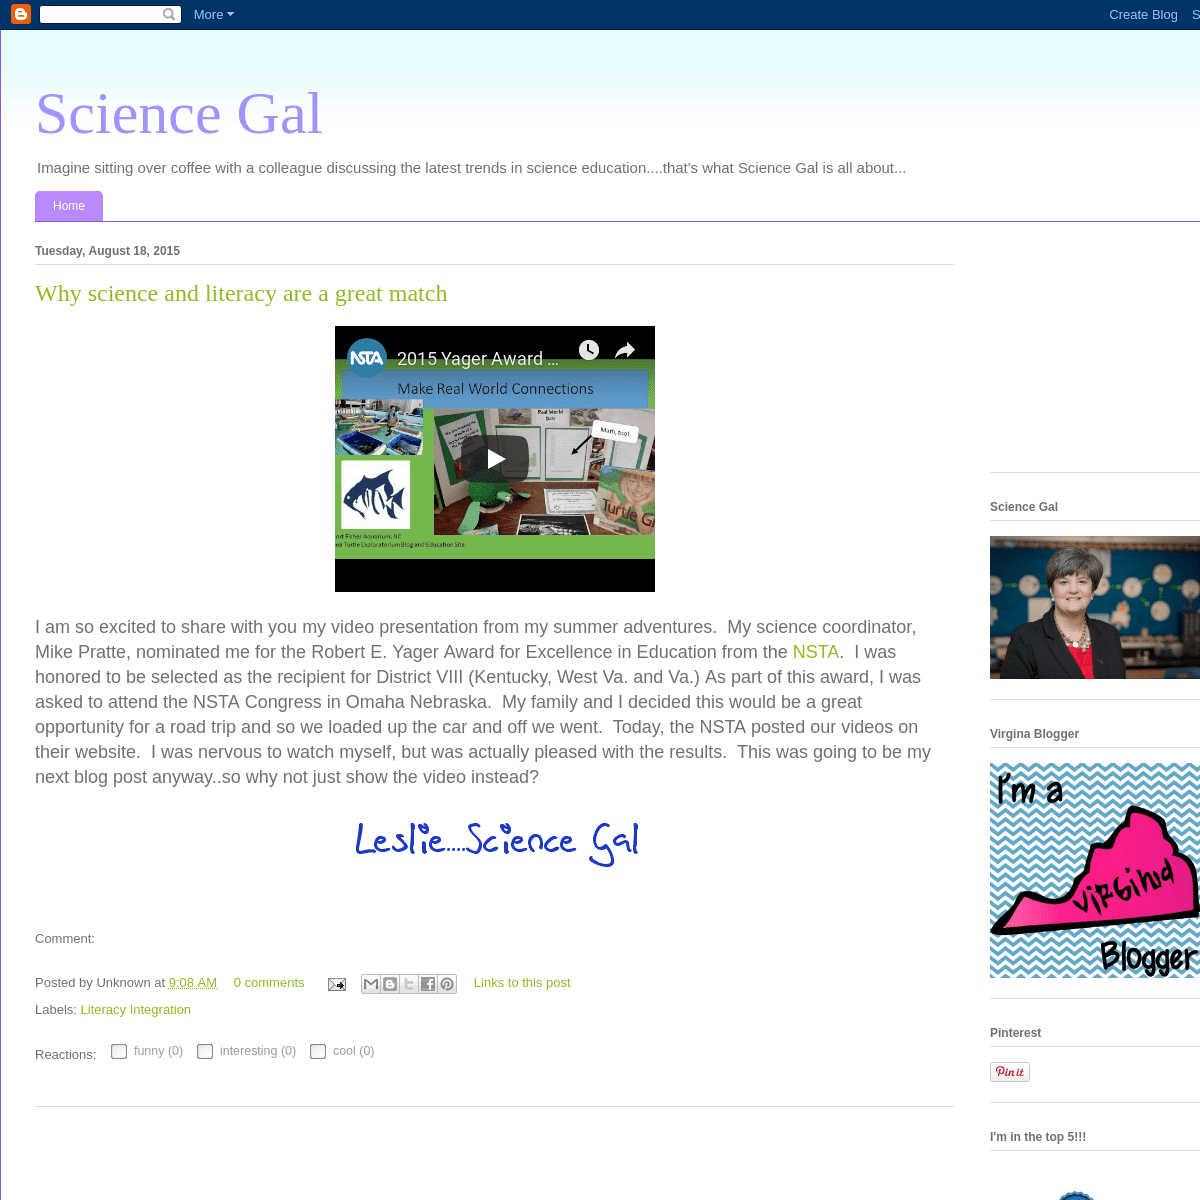 A complete backup of sciencegal-sciencegal.blogspot.com